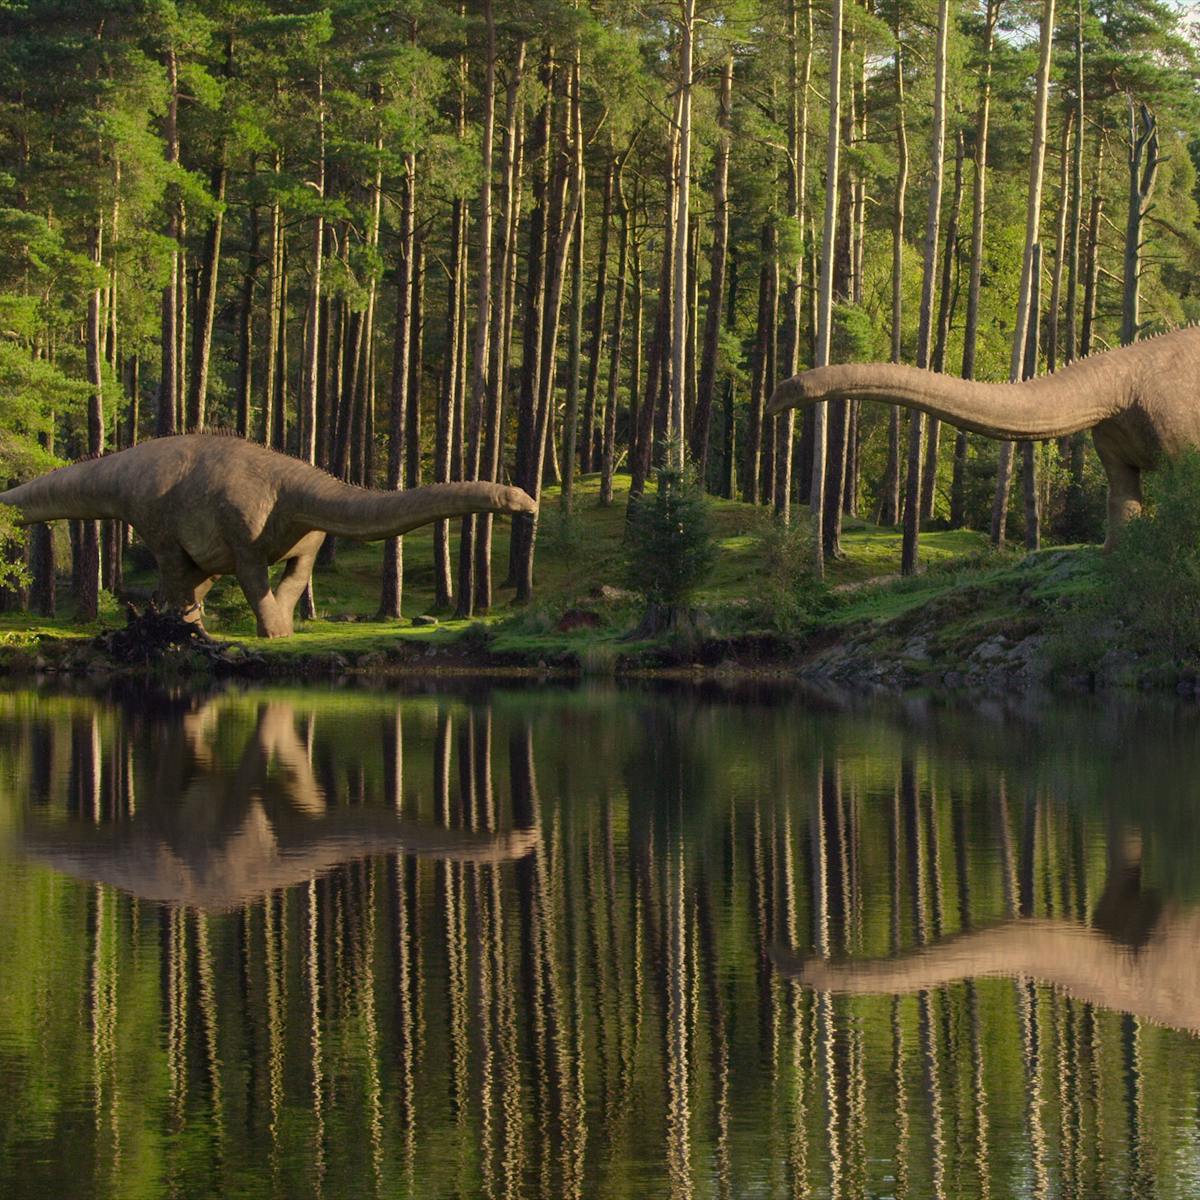 Two dinosaurs stand by a still body of water in a verdant green clearing.